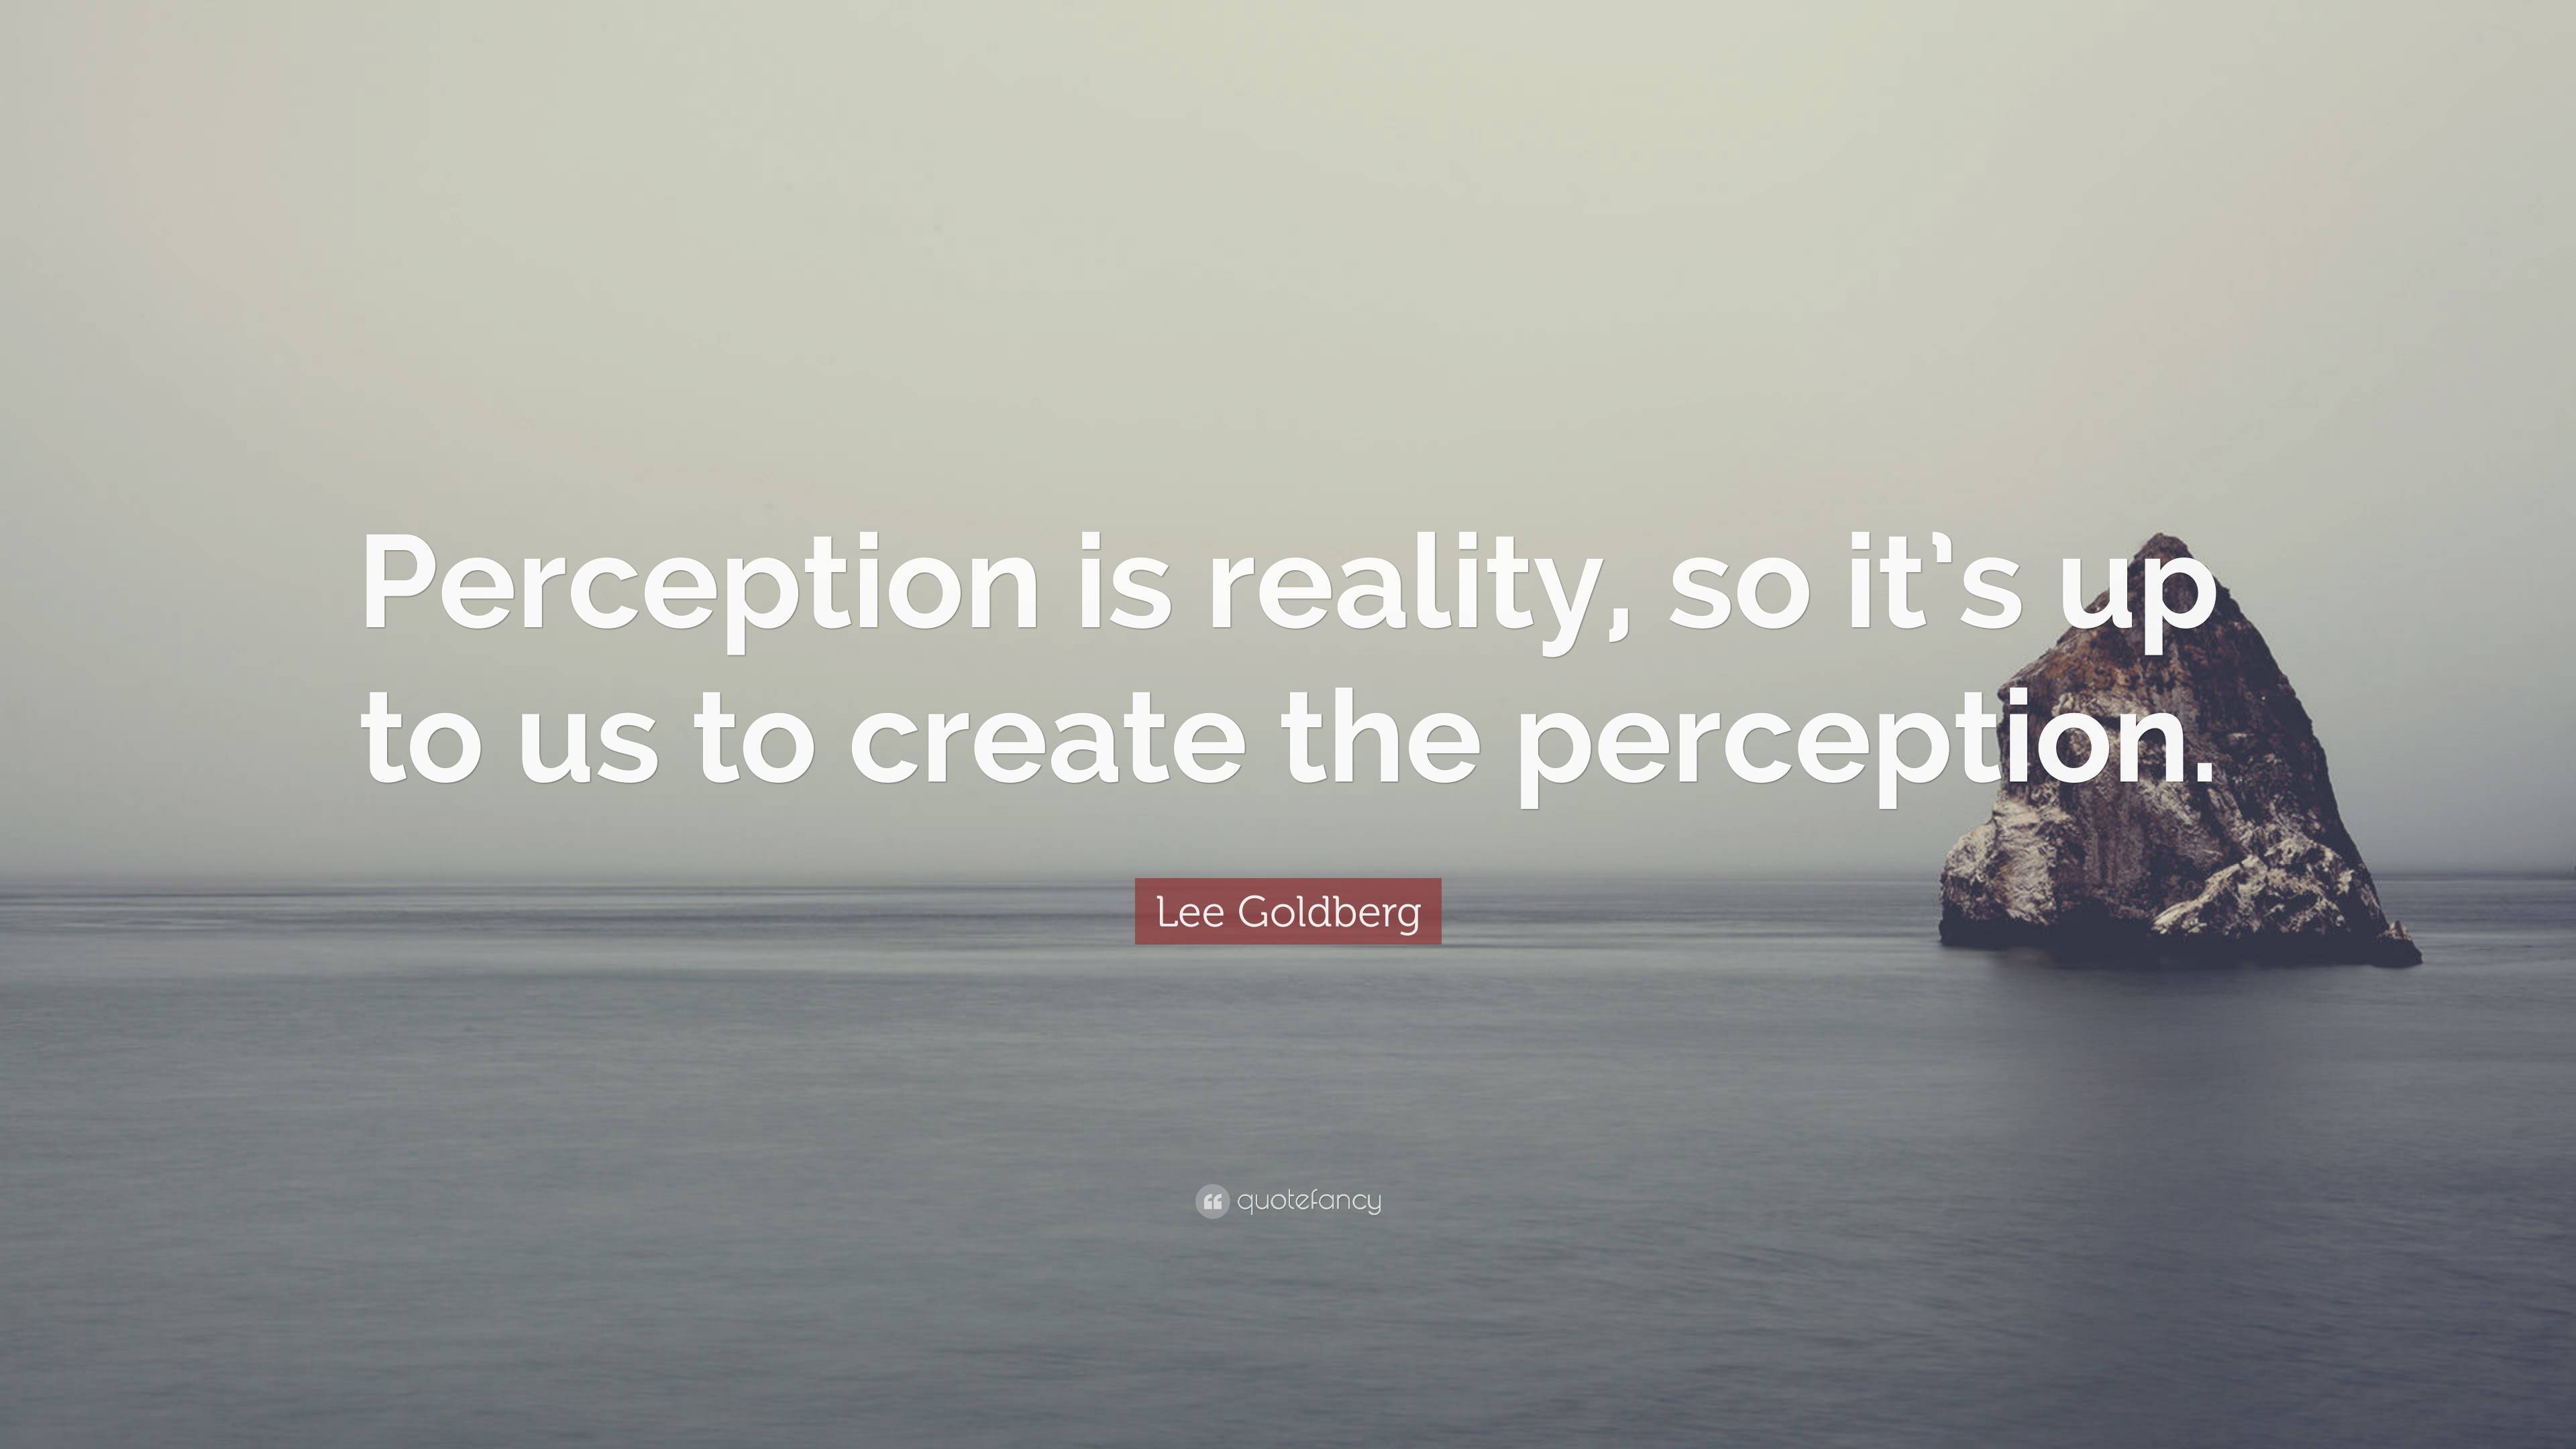 Lee Goldberg Quote: “Perception is reality, so it’s up to us to create ...